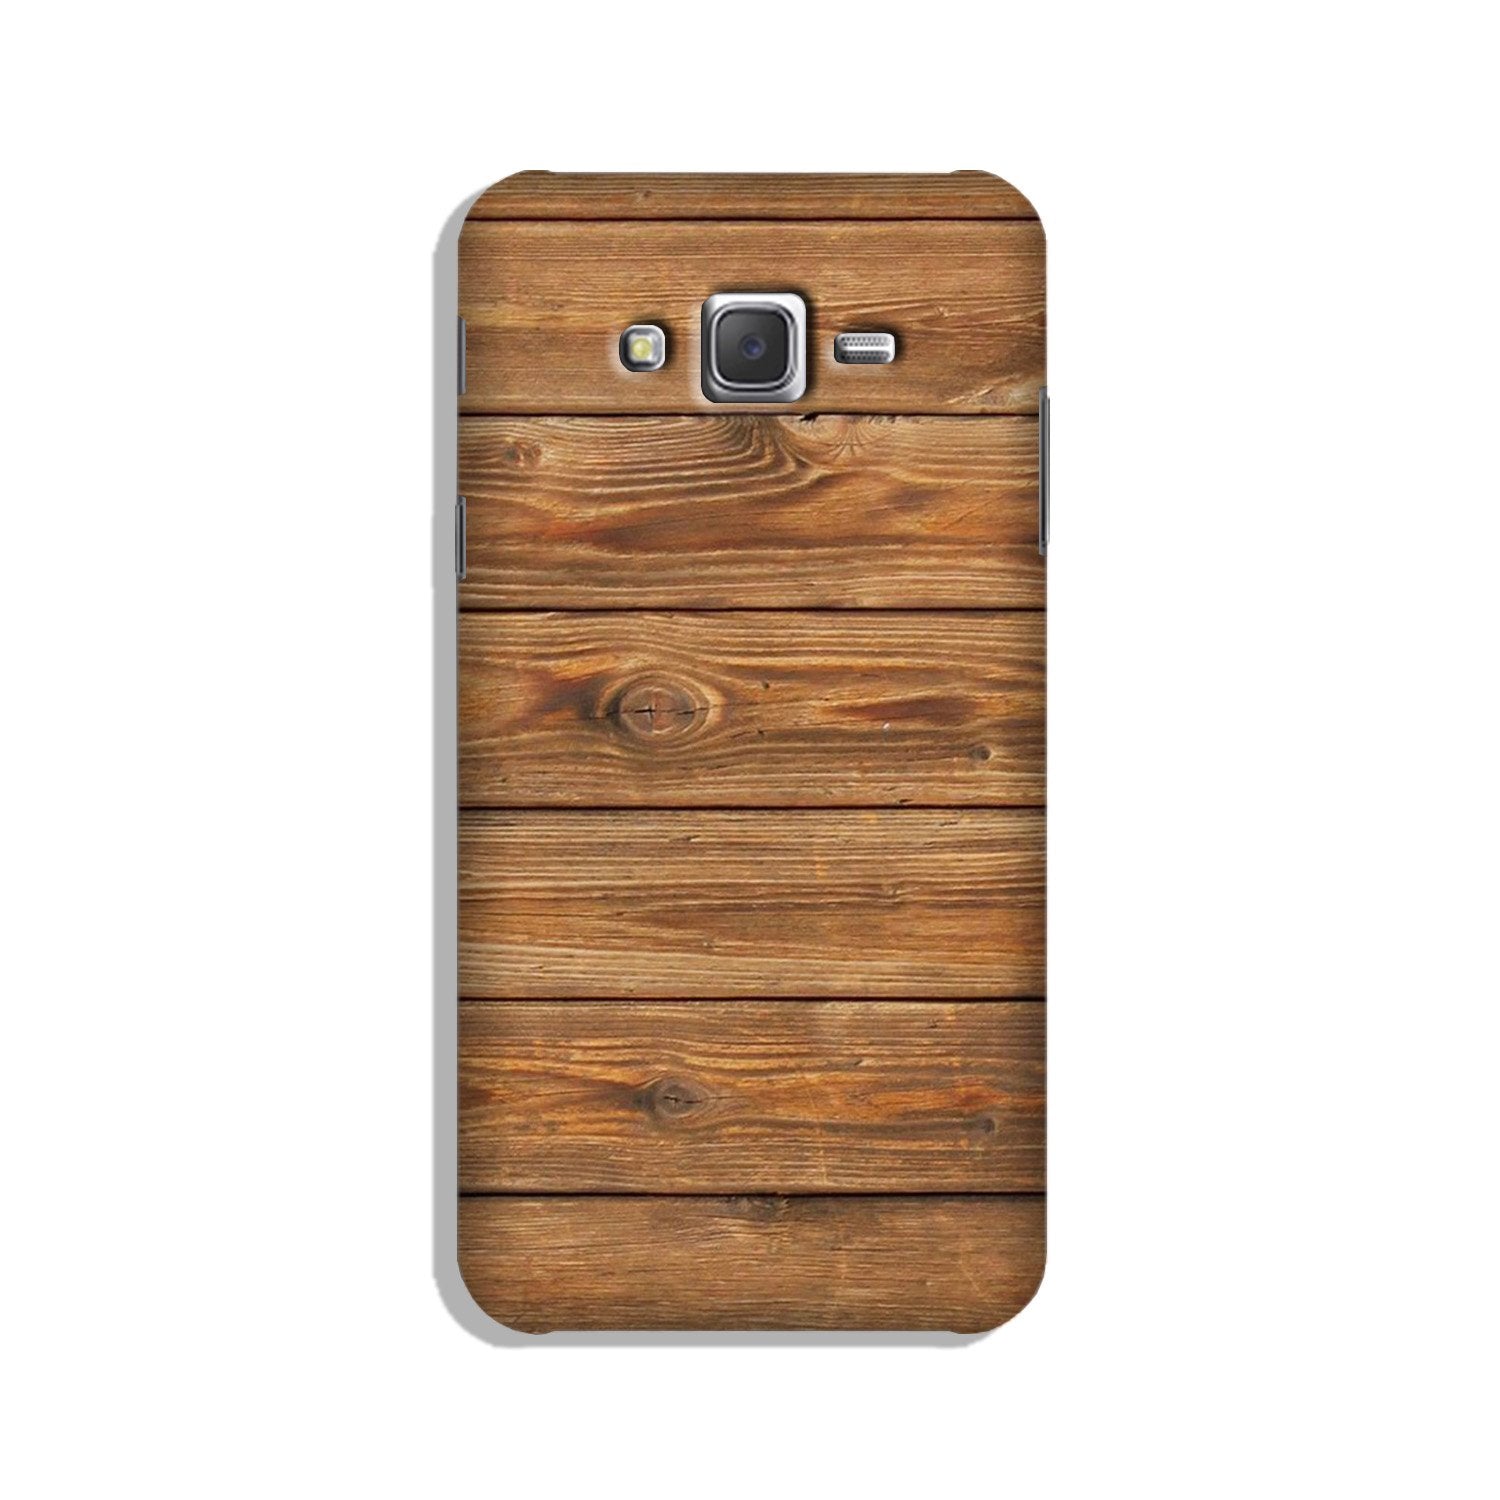 Wooden Look Case for Galaxy J7 Nxt  (Design - 113)